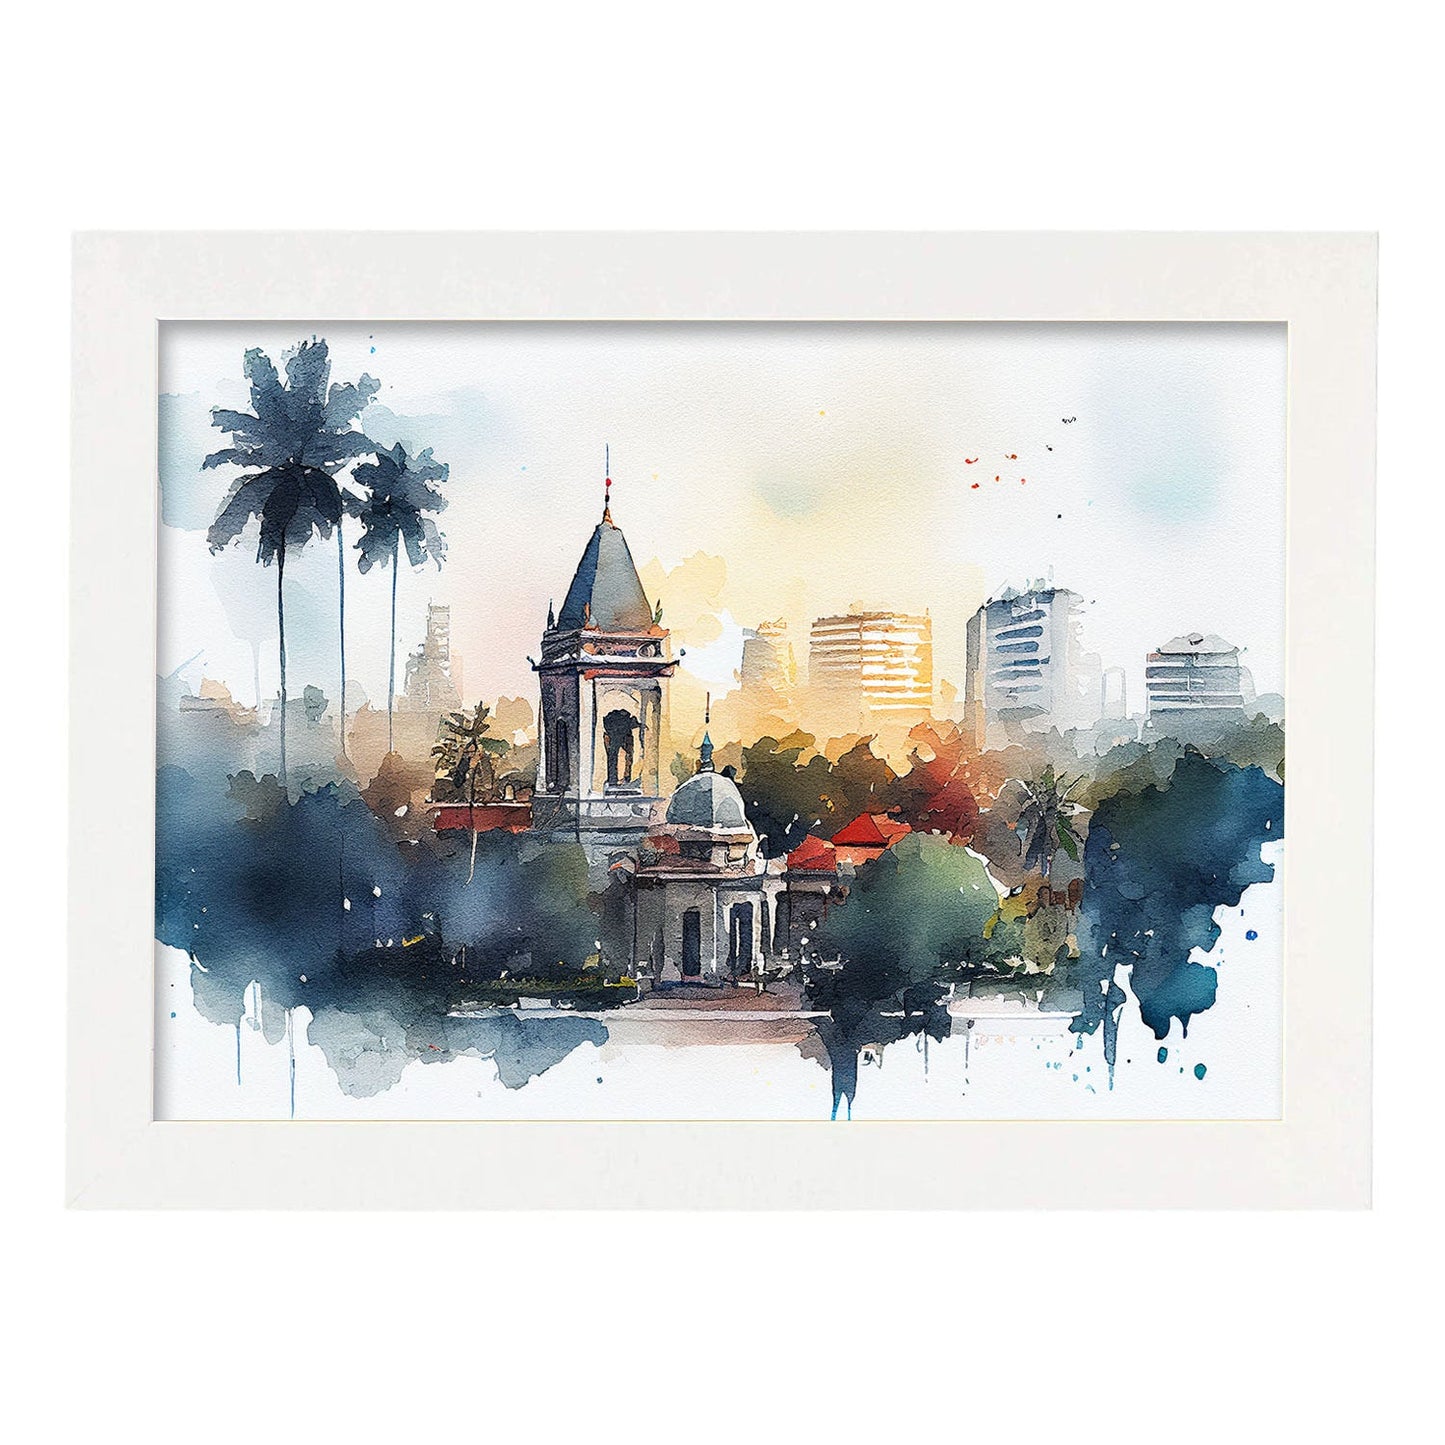 Nacnic watercolor of a skyline of the city of Hanoi_2. Aesthetic Wall Art Prints for Bedroom or Living Room Design.-Artwork-Nacnic-A4-Marco Blanco-Nacnic Estudio SL